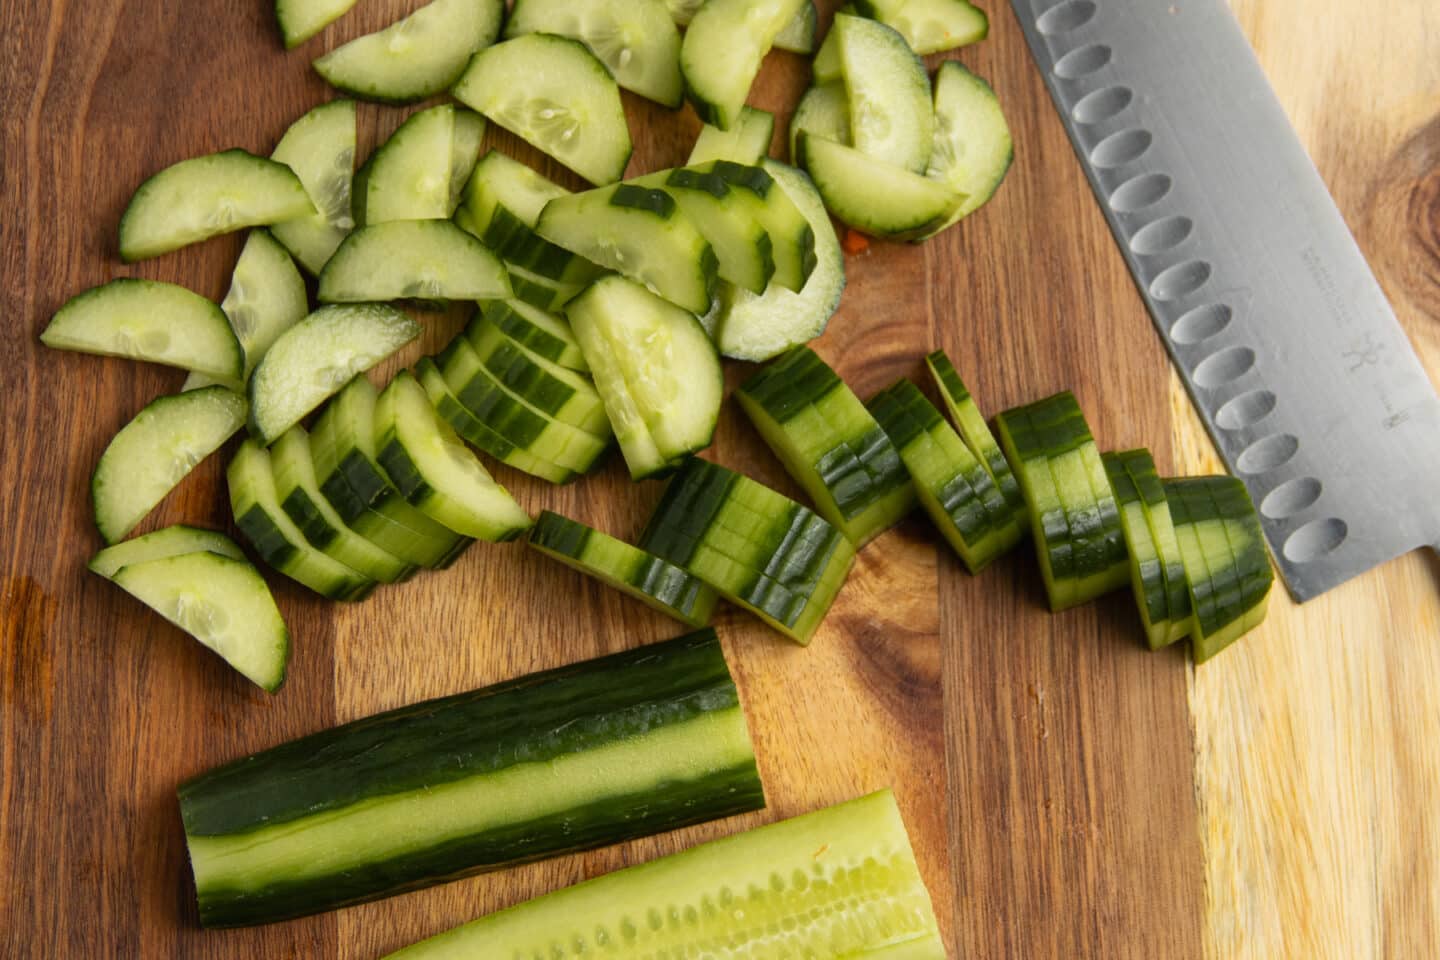 This is a picture of cucumber being sliced.